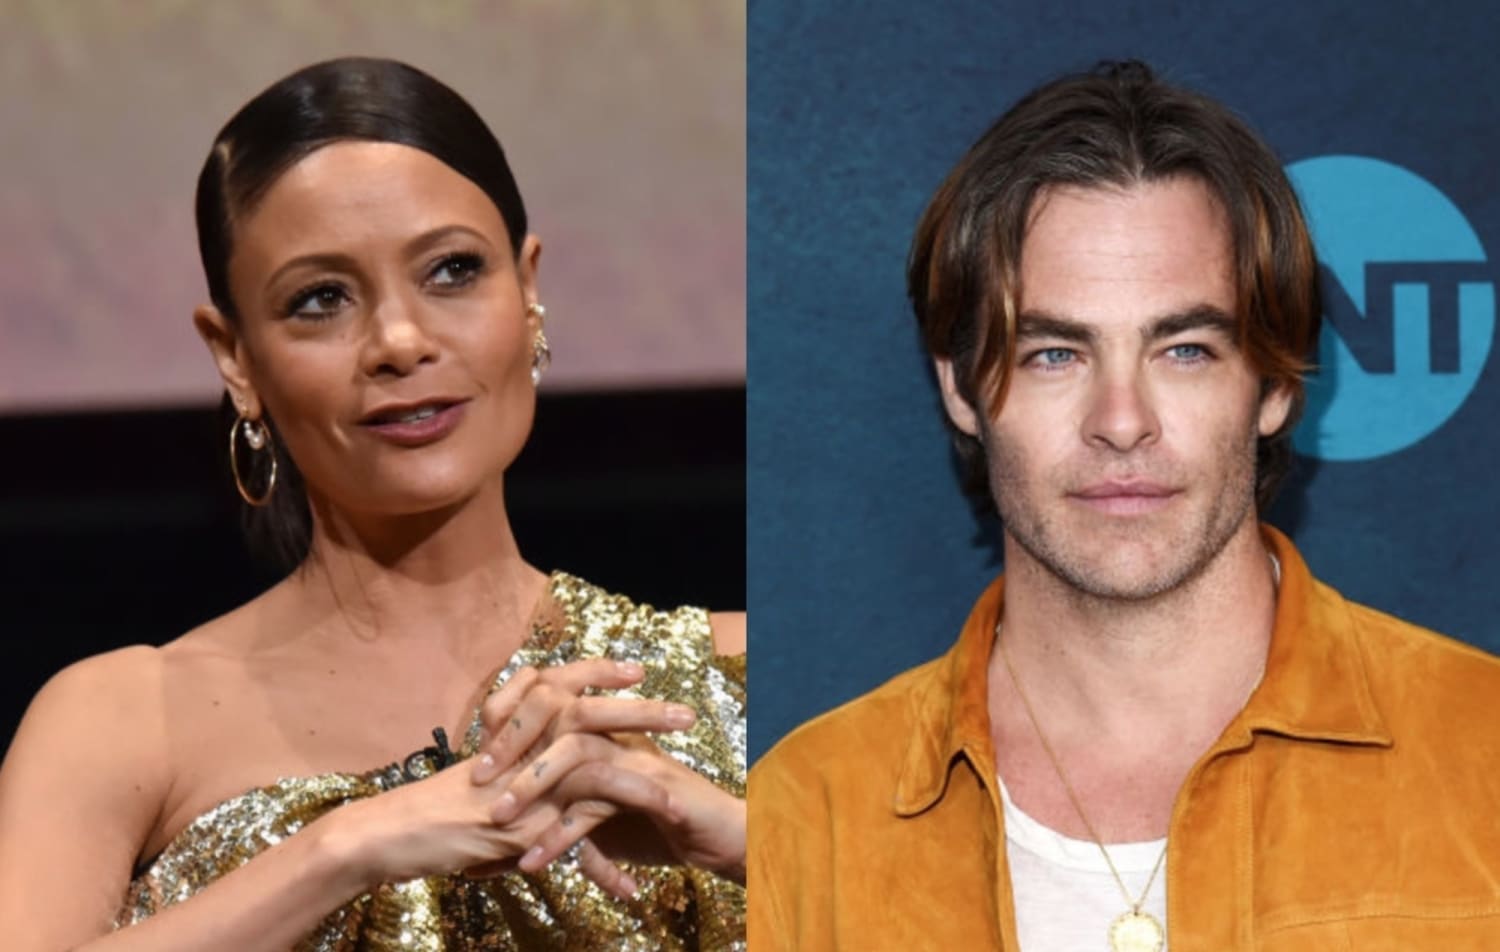 Thandie Newton joins Chris Pine in new film 'All The Old Knives'